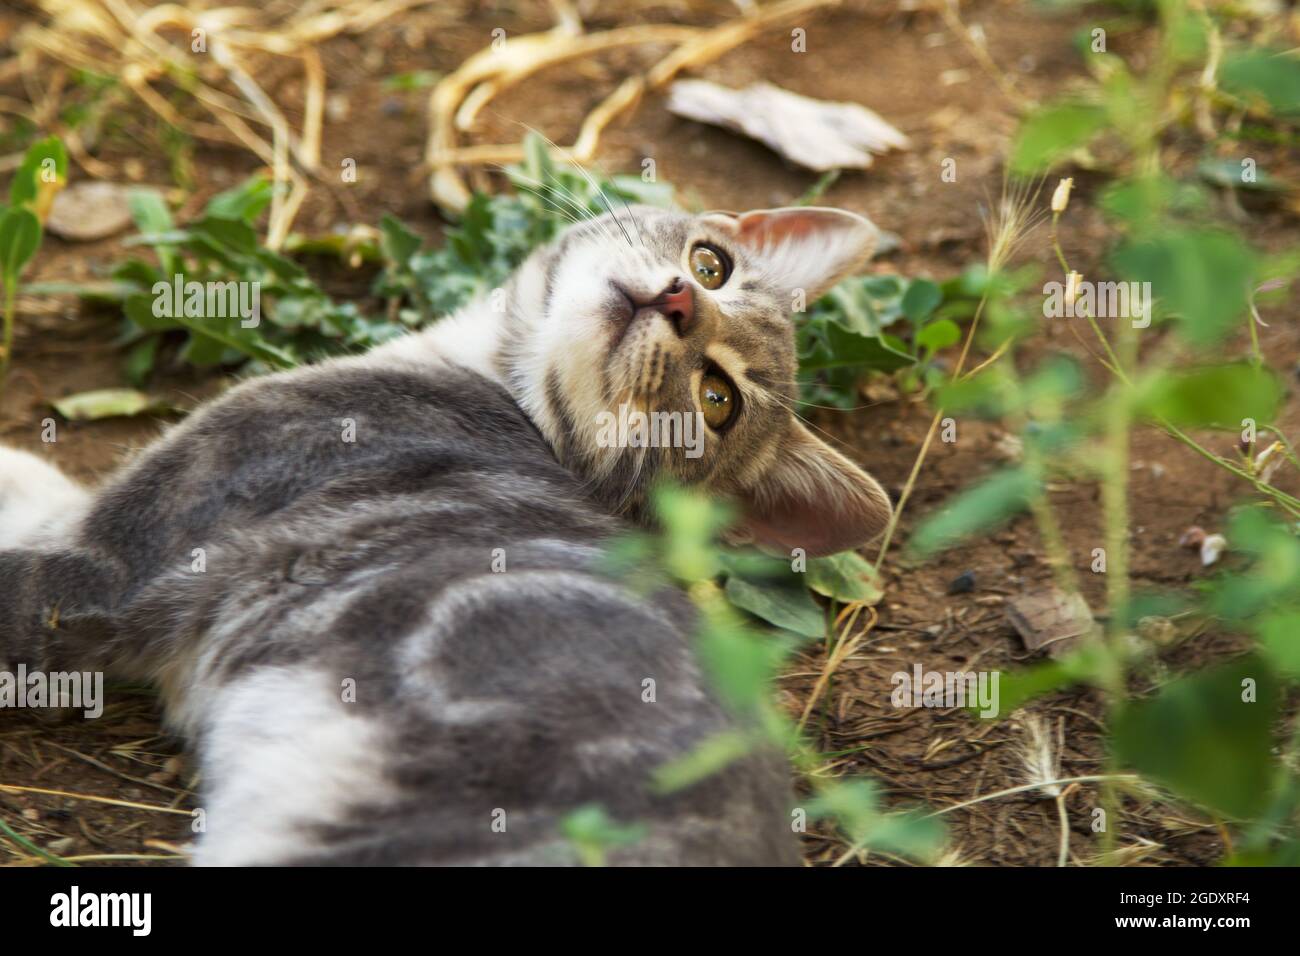 Cute baby cat playing in the garden Stock Photo